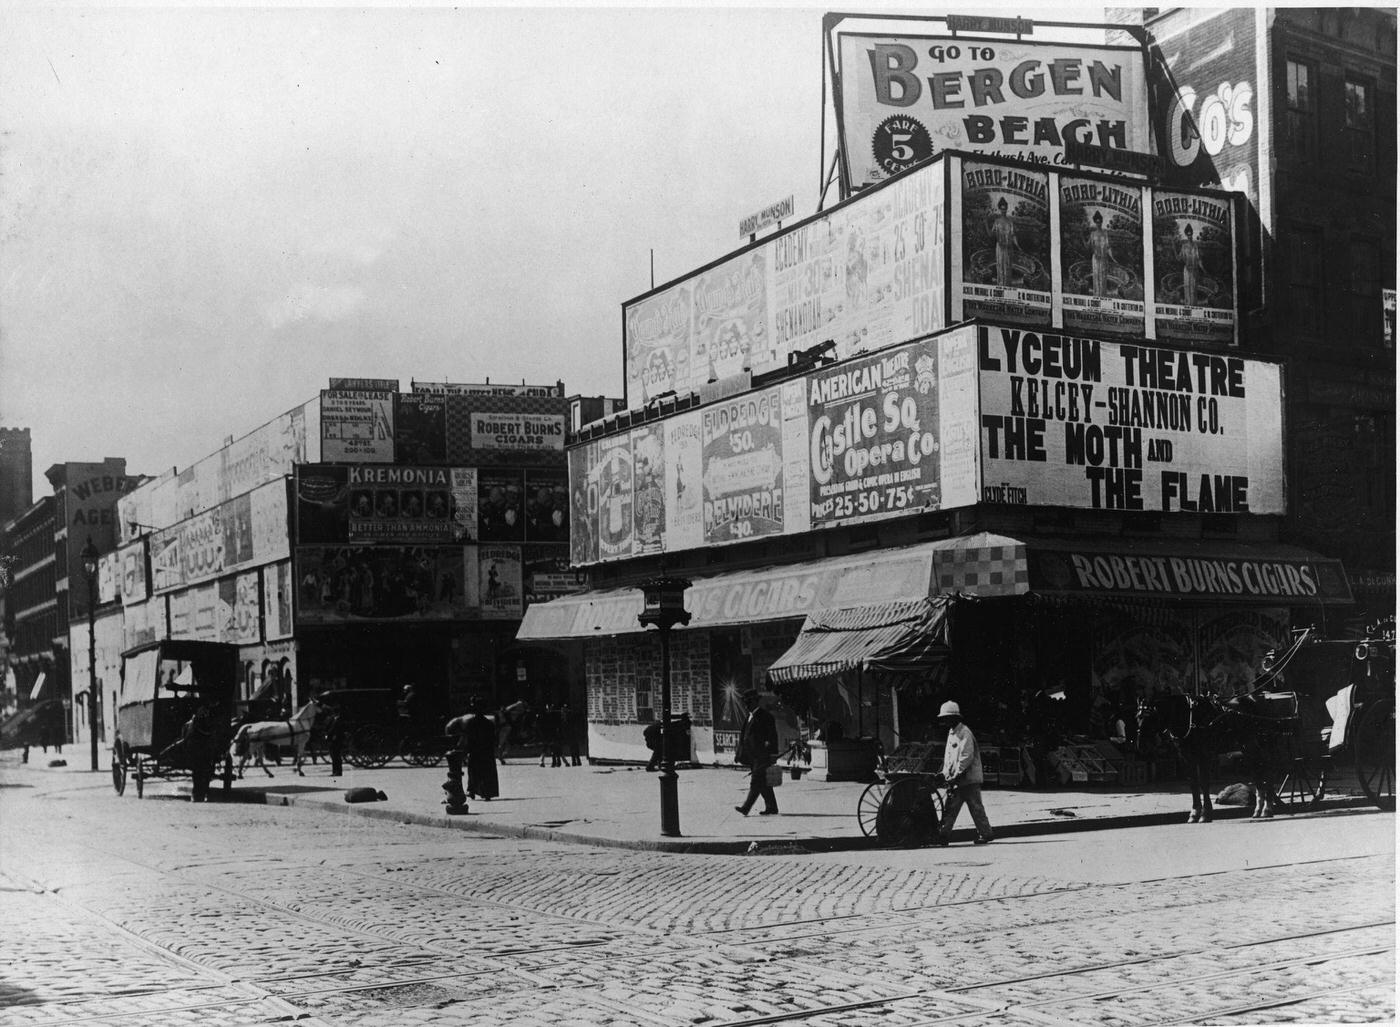 Broadway And 42Nd Street With Cigar Store, Horsedrawn Carriages, Advertisements, New York City, 1900